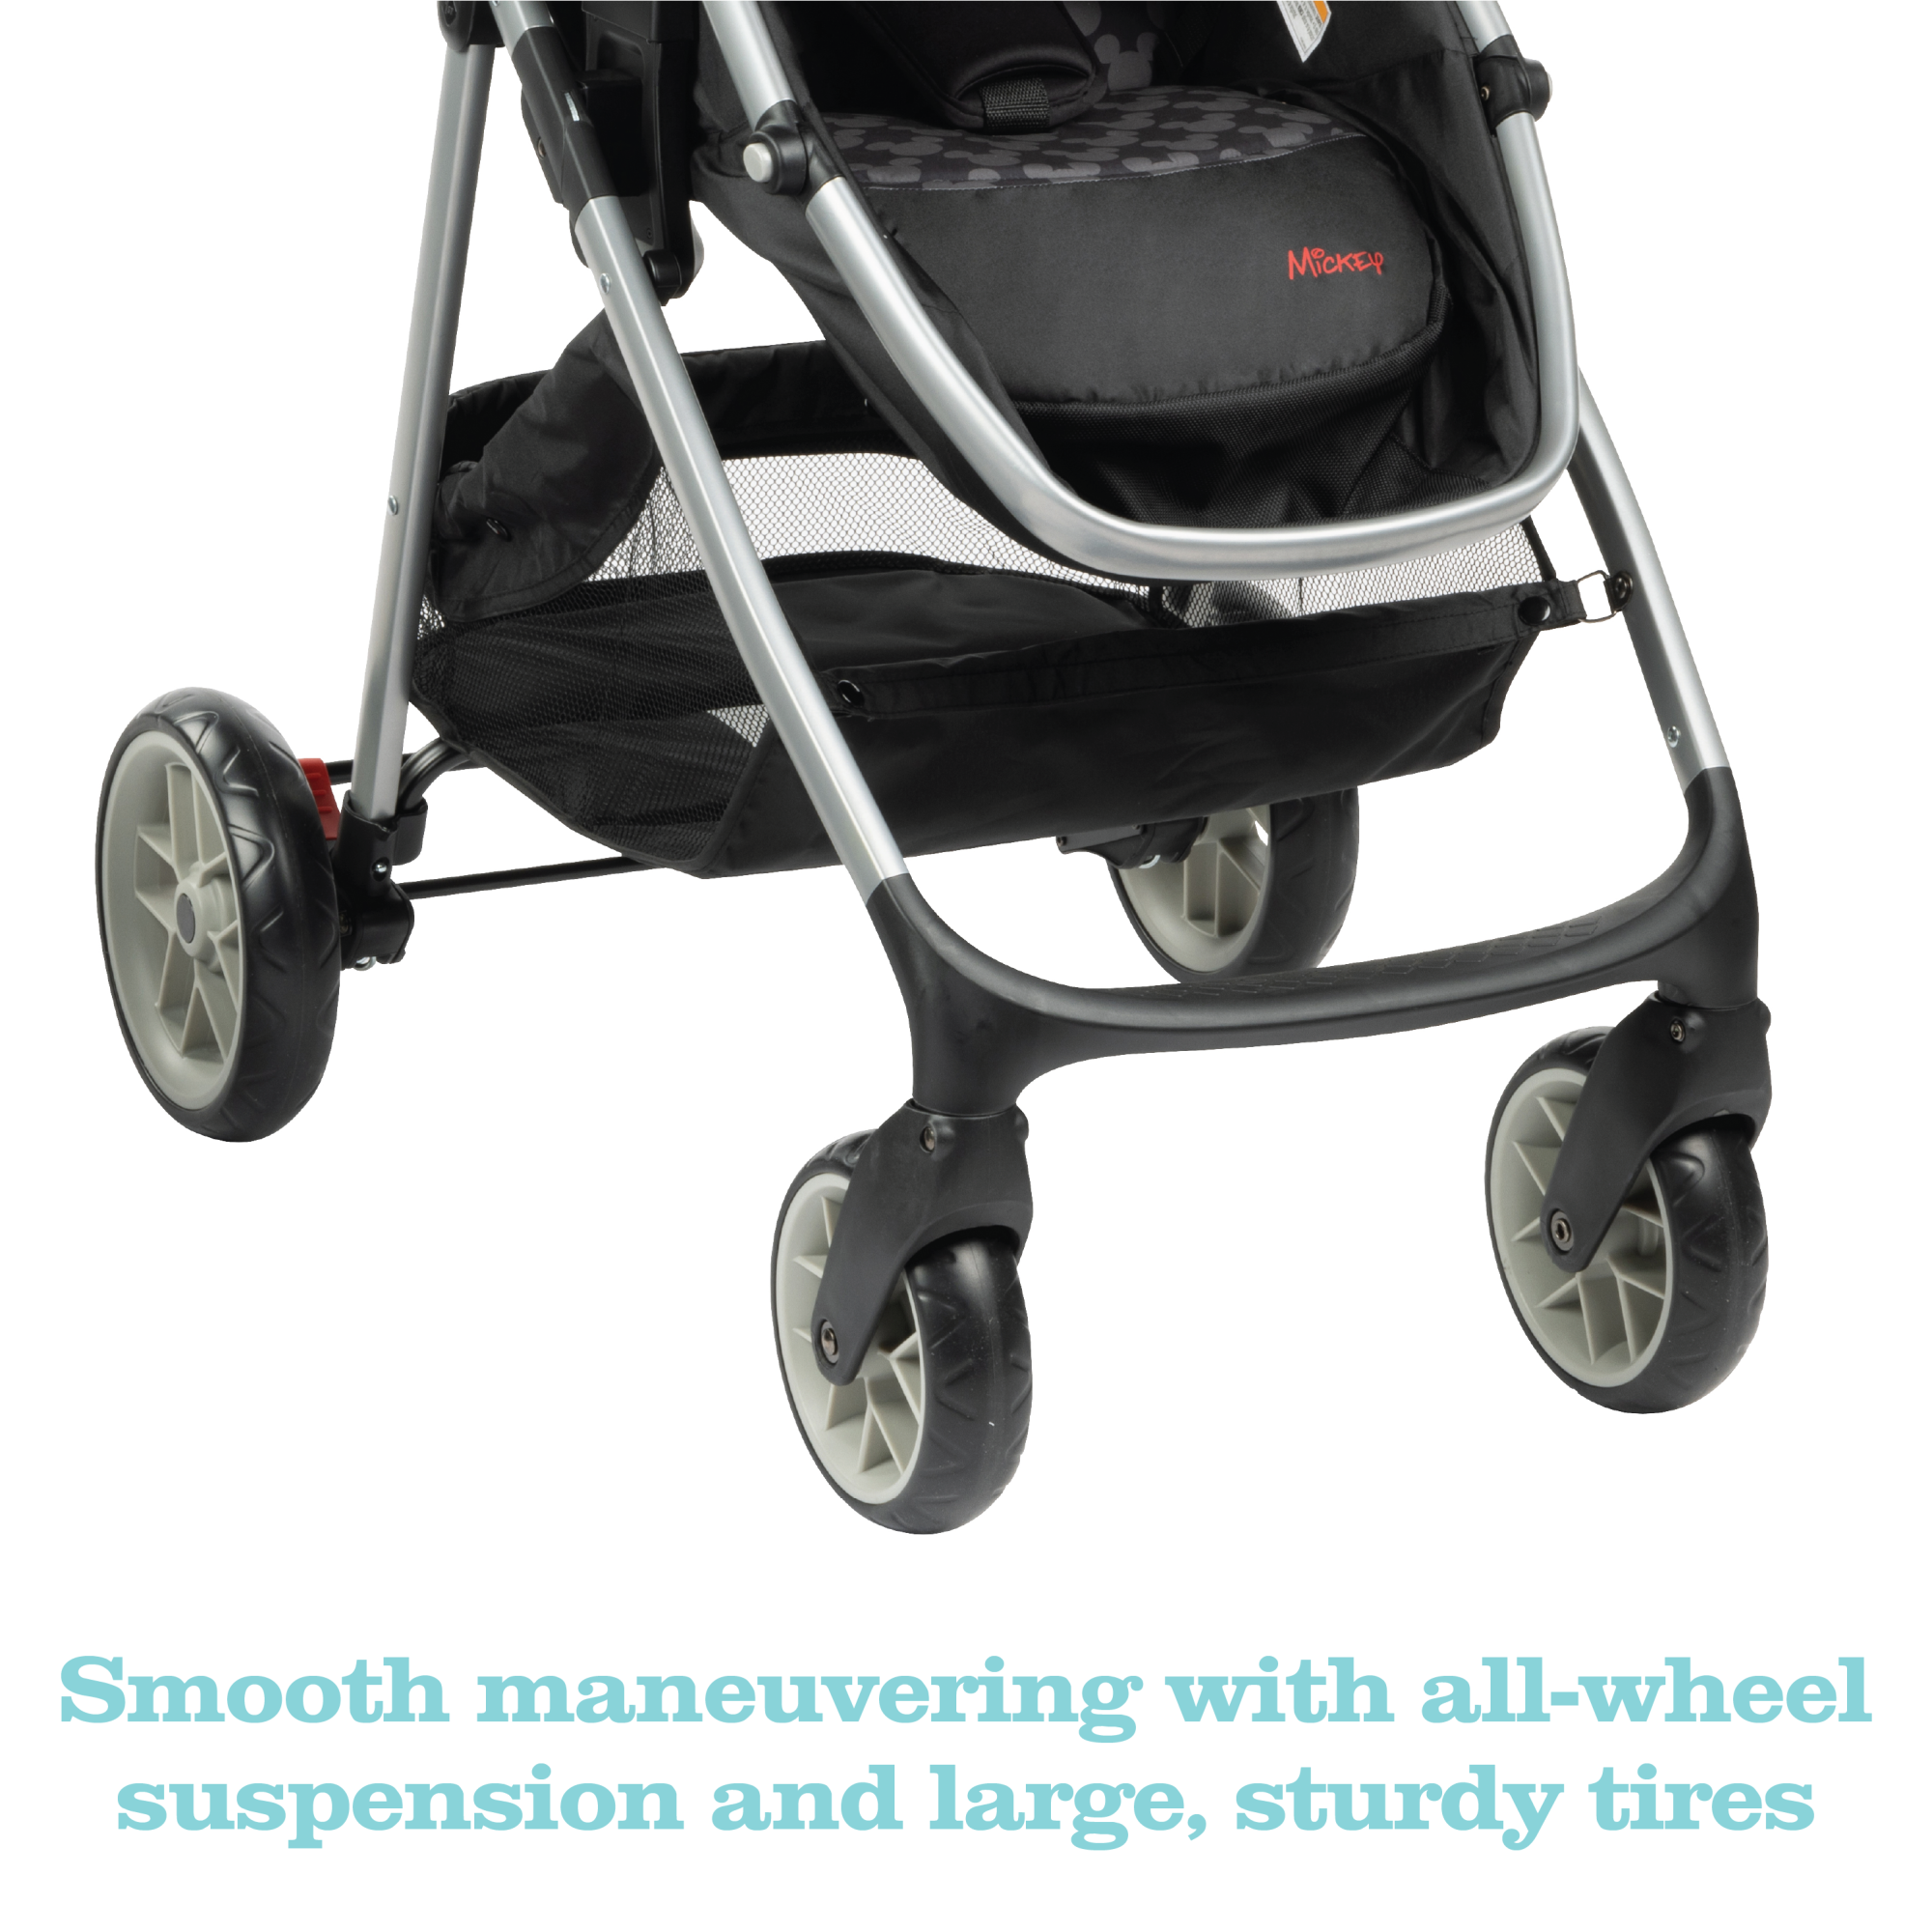 Disney Baby Grow and Go™ Modular Travel System - smooth maneuvering with all-wheel suspension and large, sturdy tires